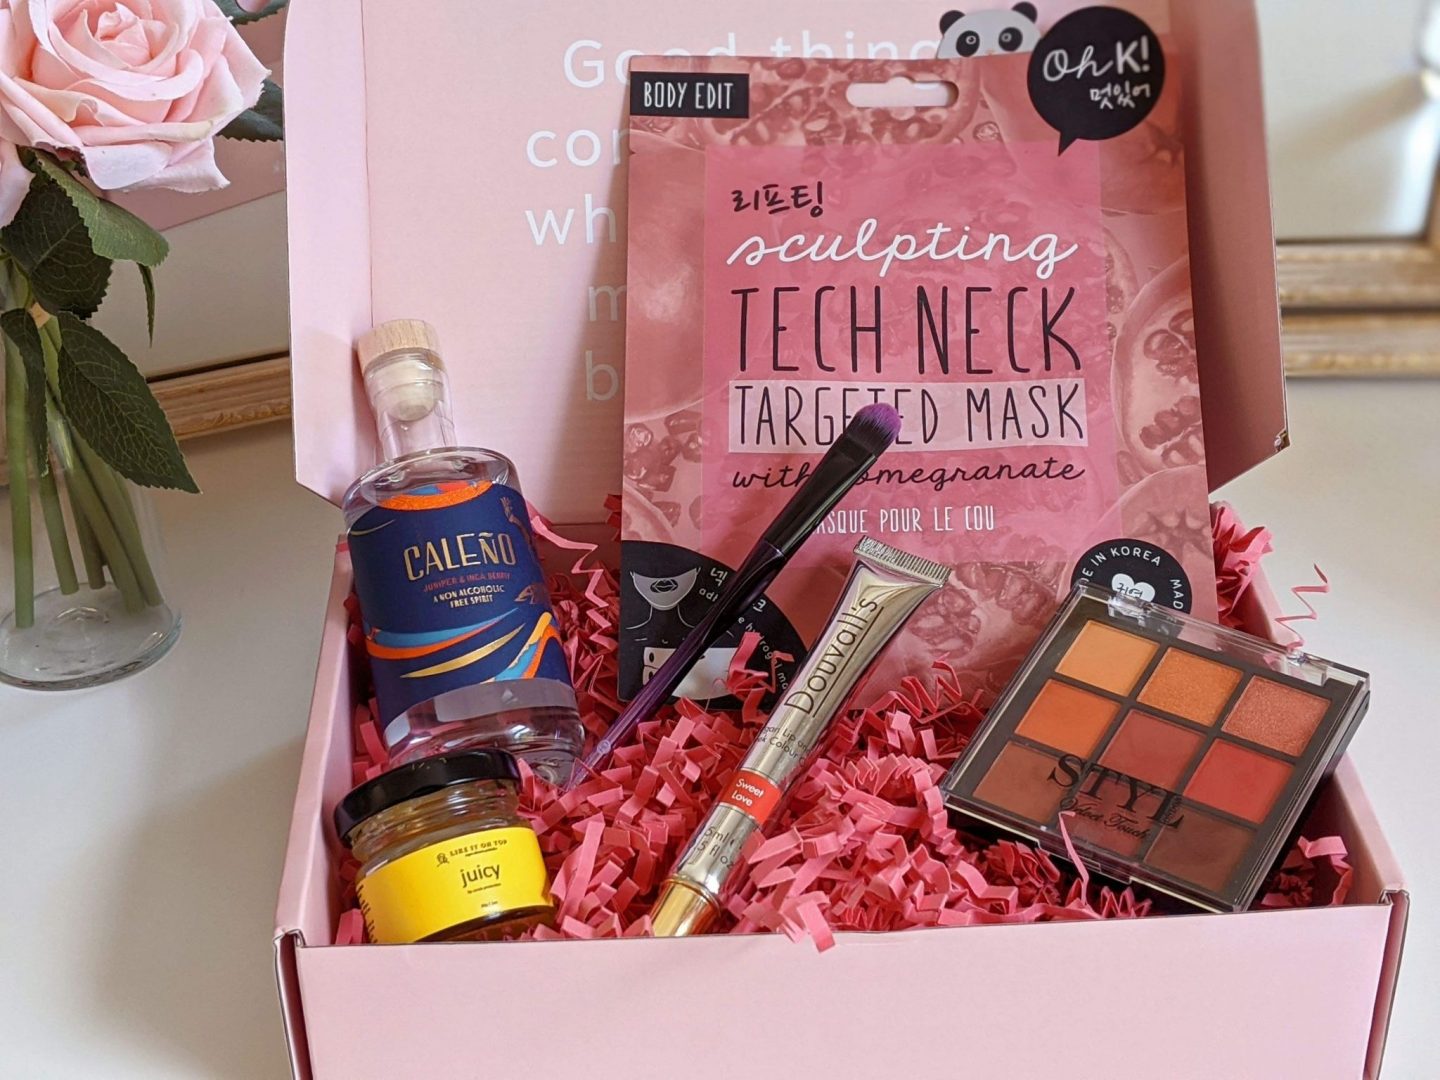 Roccabox September Beauty Box Review